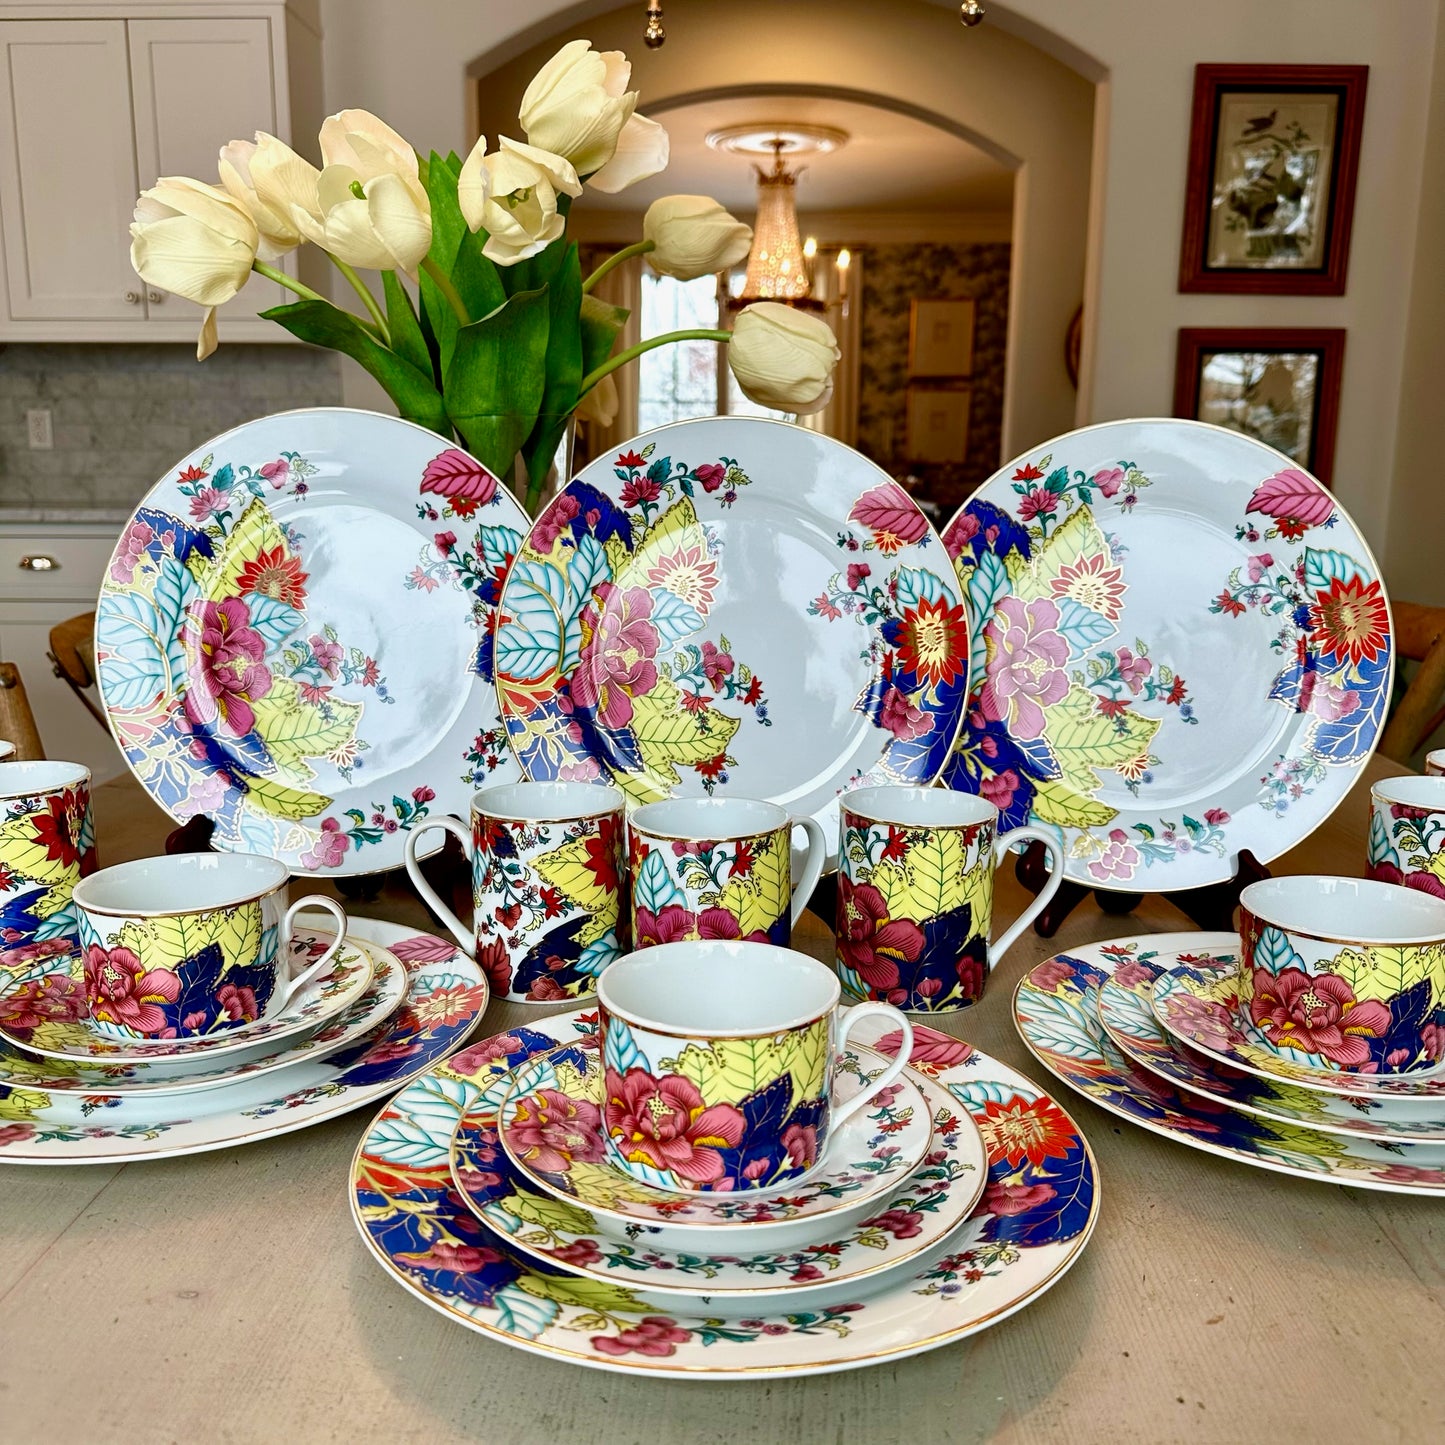 Gorgeous! Tobacco Leaf Imperial China Dishes Setting Plates, Cups, Saucer